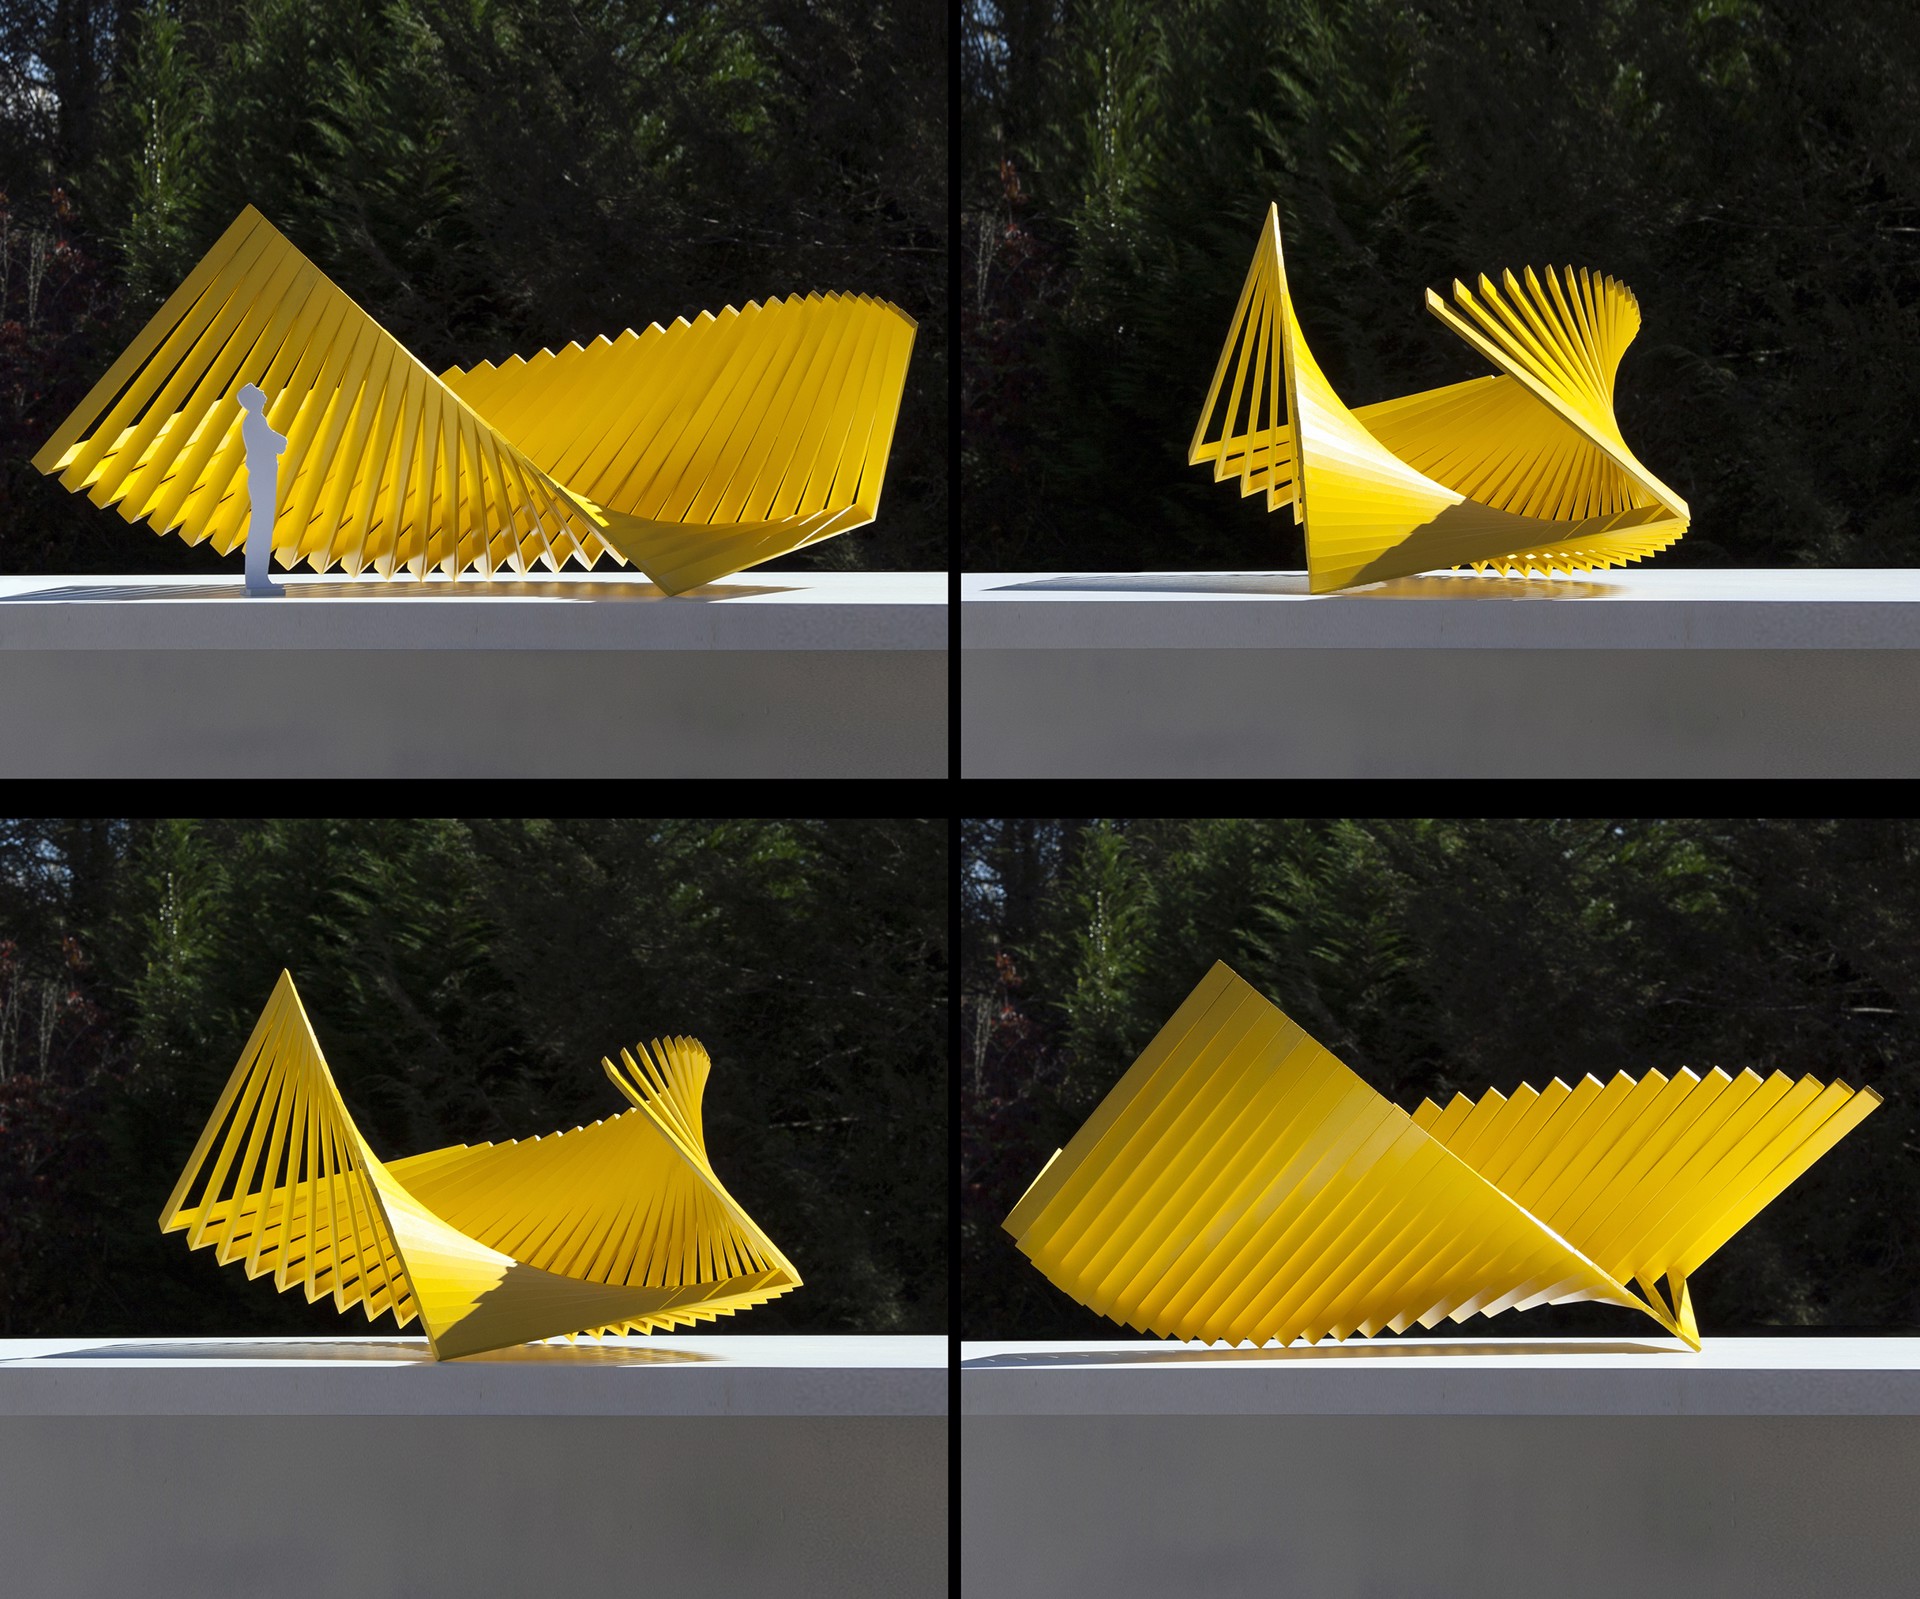 Untitled Yellow Maquette by Robert Winkler